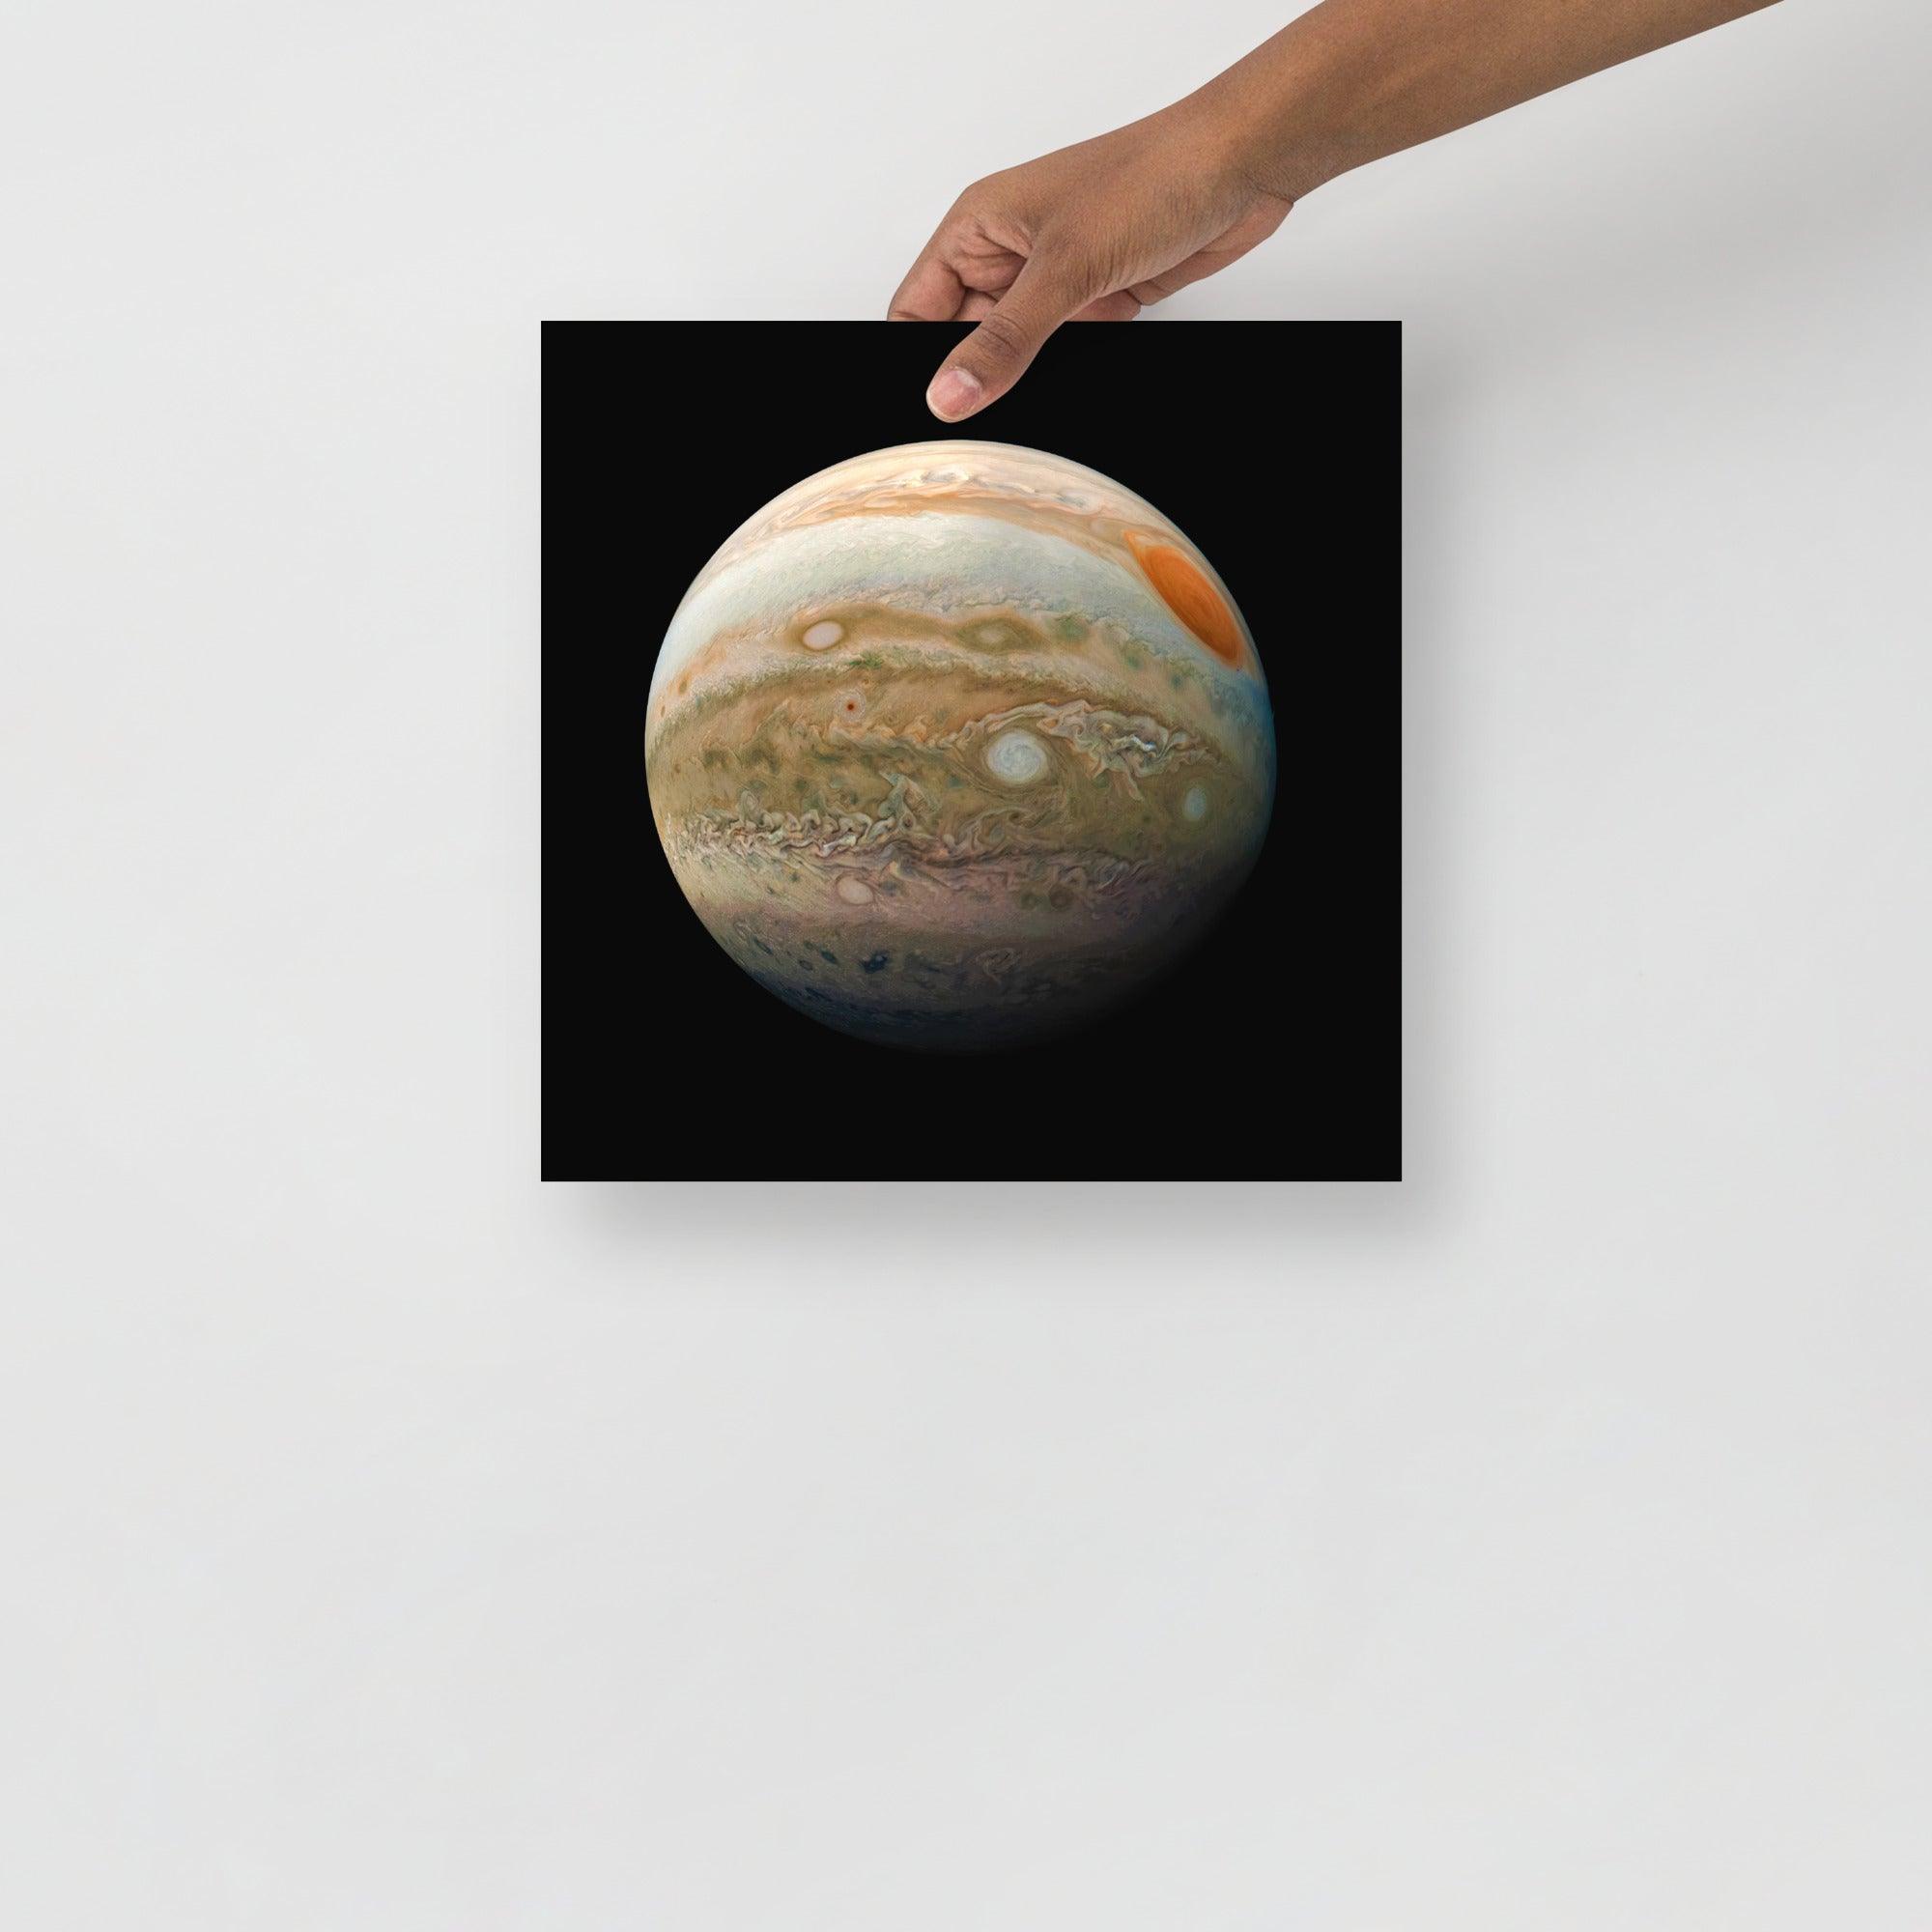 A Planet Jupiter From the Juno Spacecraft poster on a plain backdrop in size 12x12”.